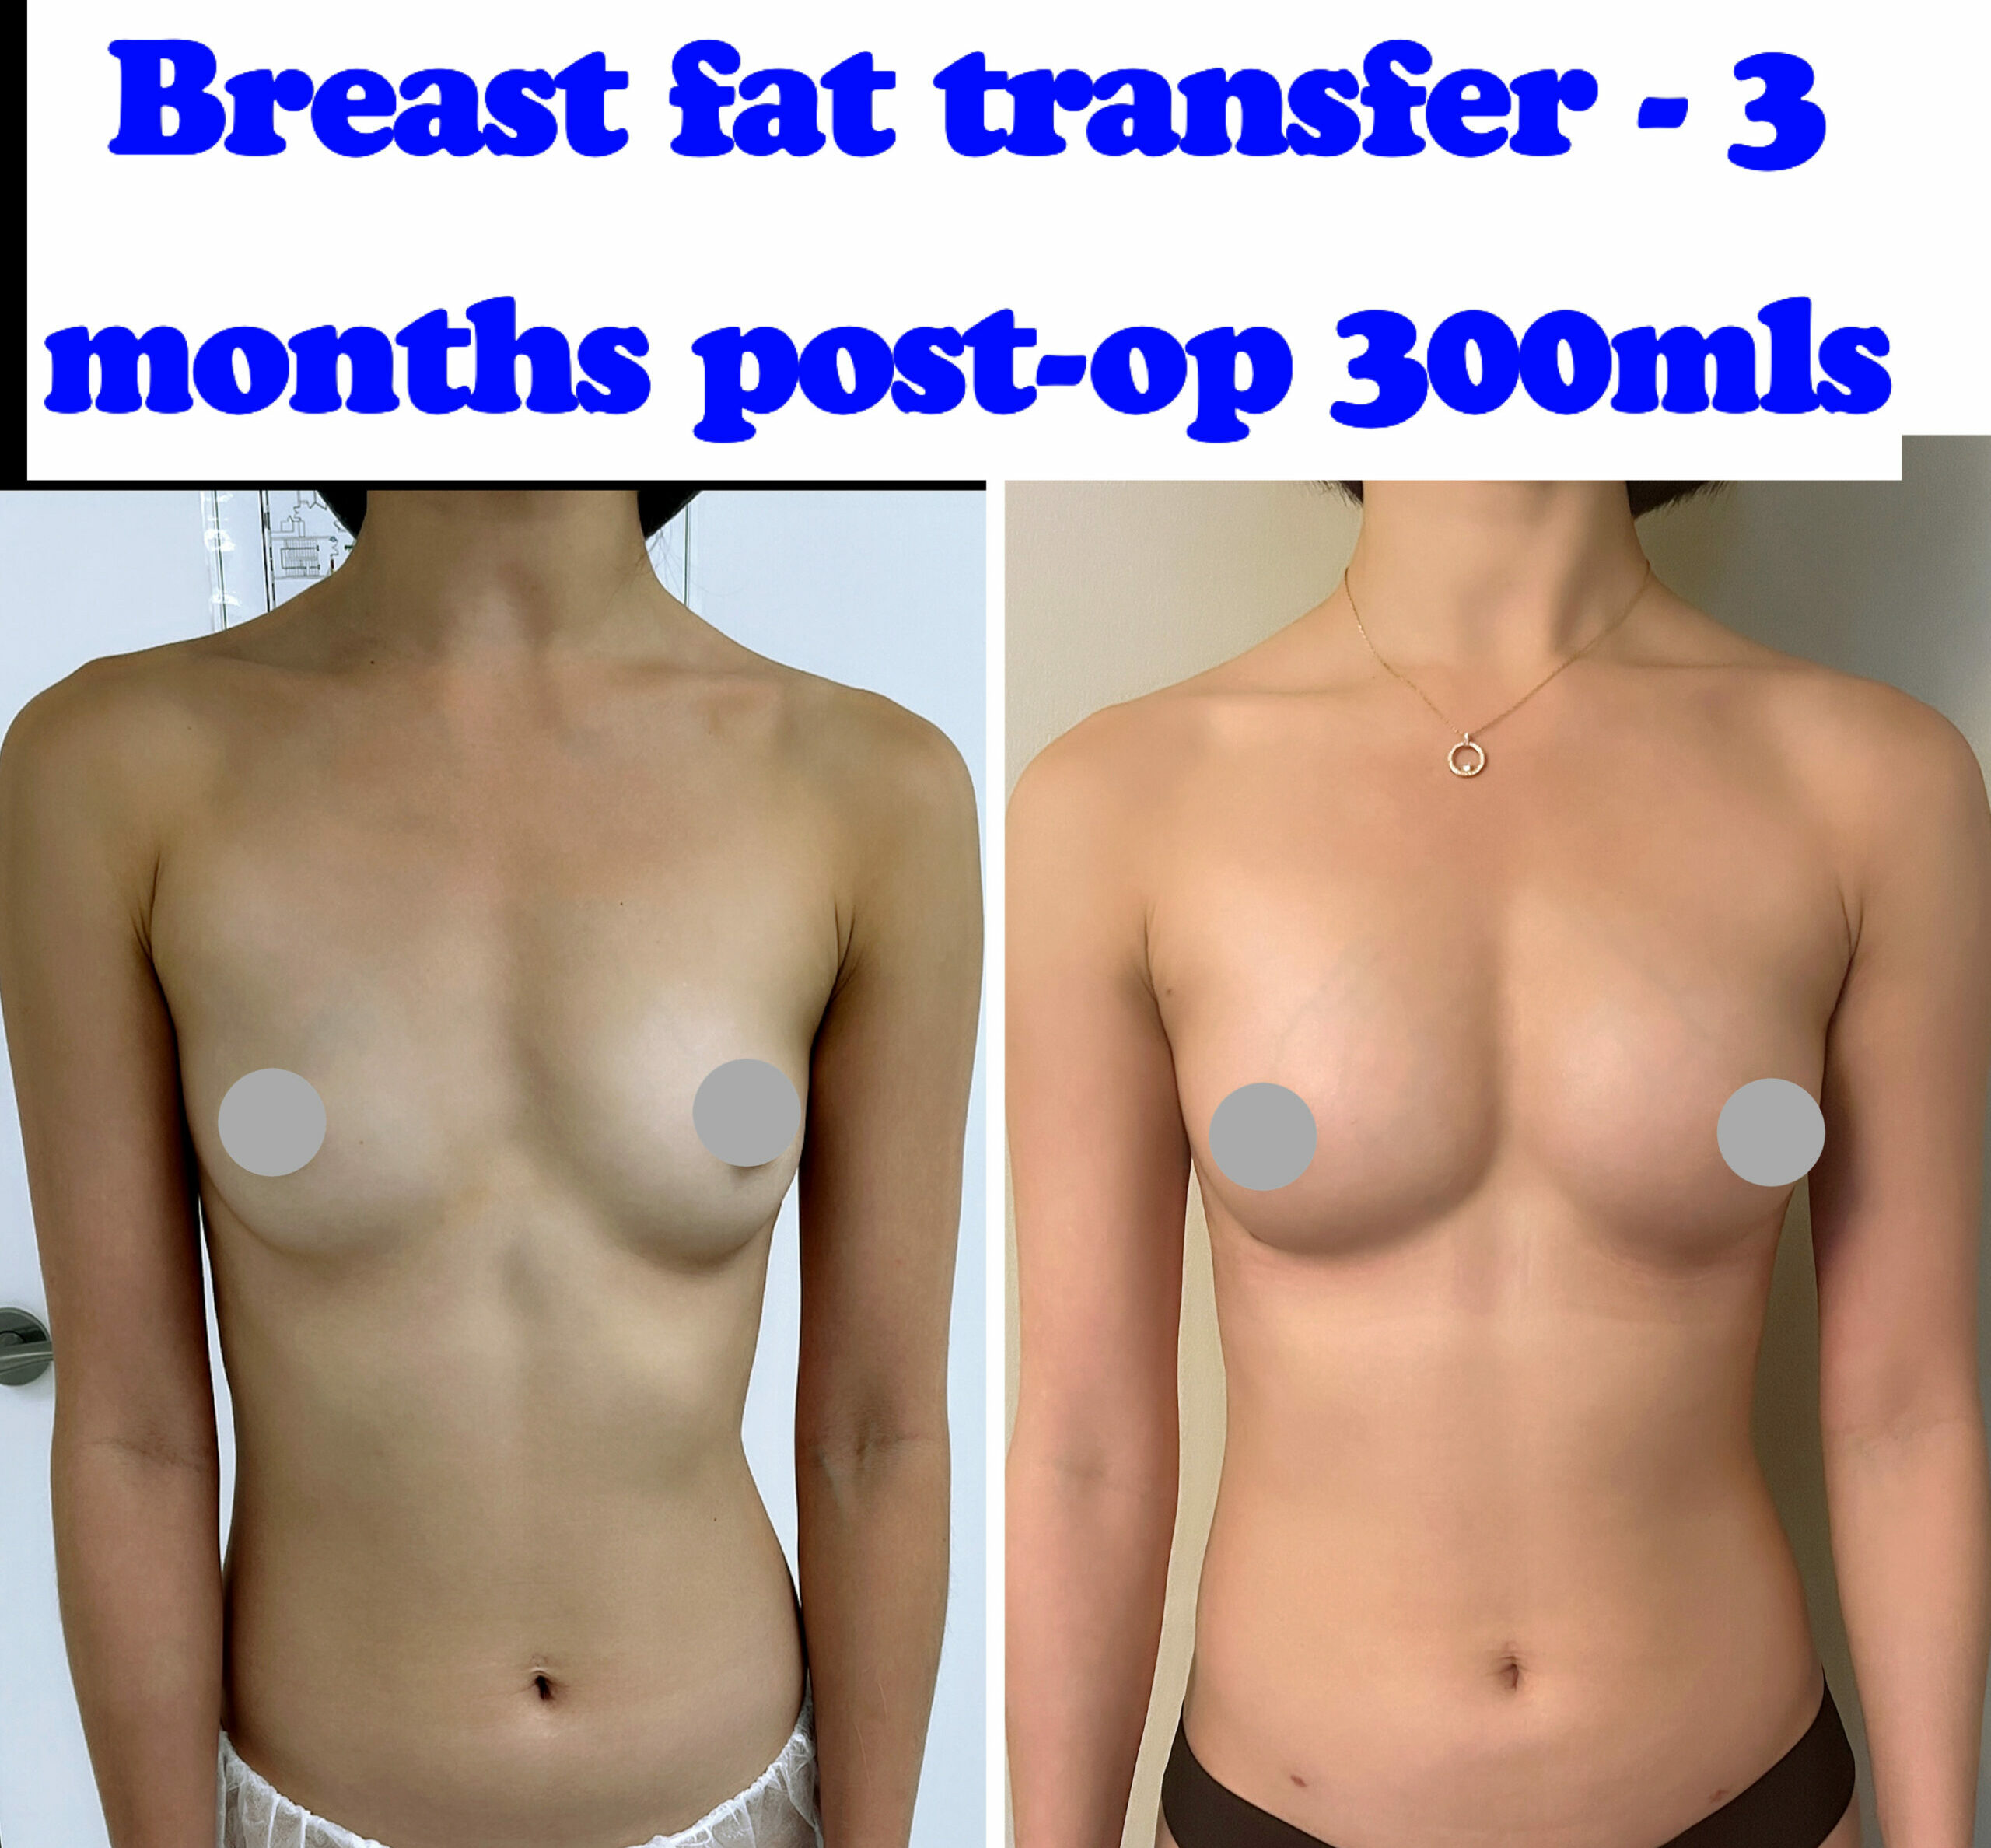 Breast fat transfer augmentation before after photos at Harley Clinic in London, UK